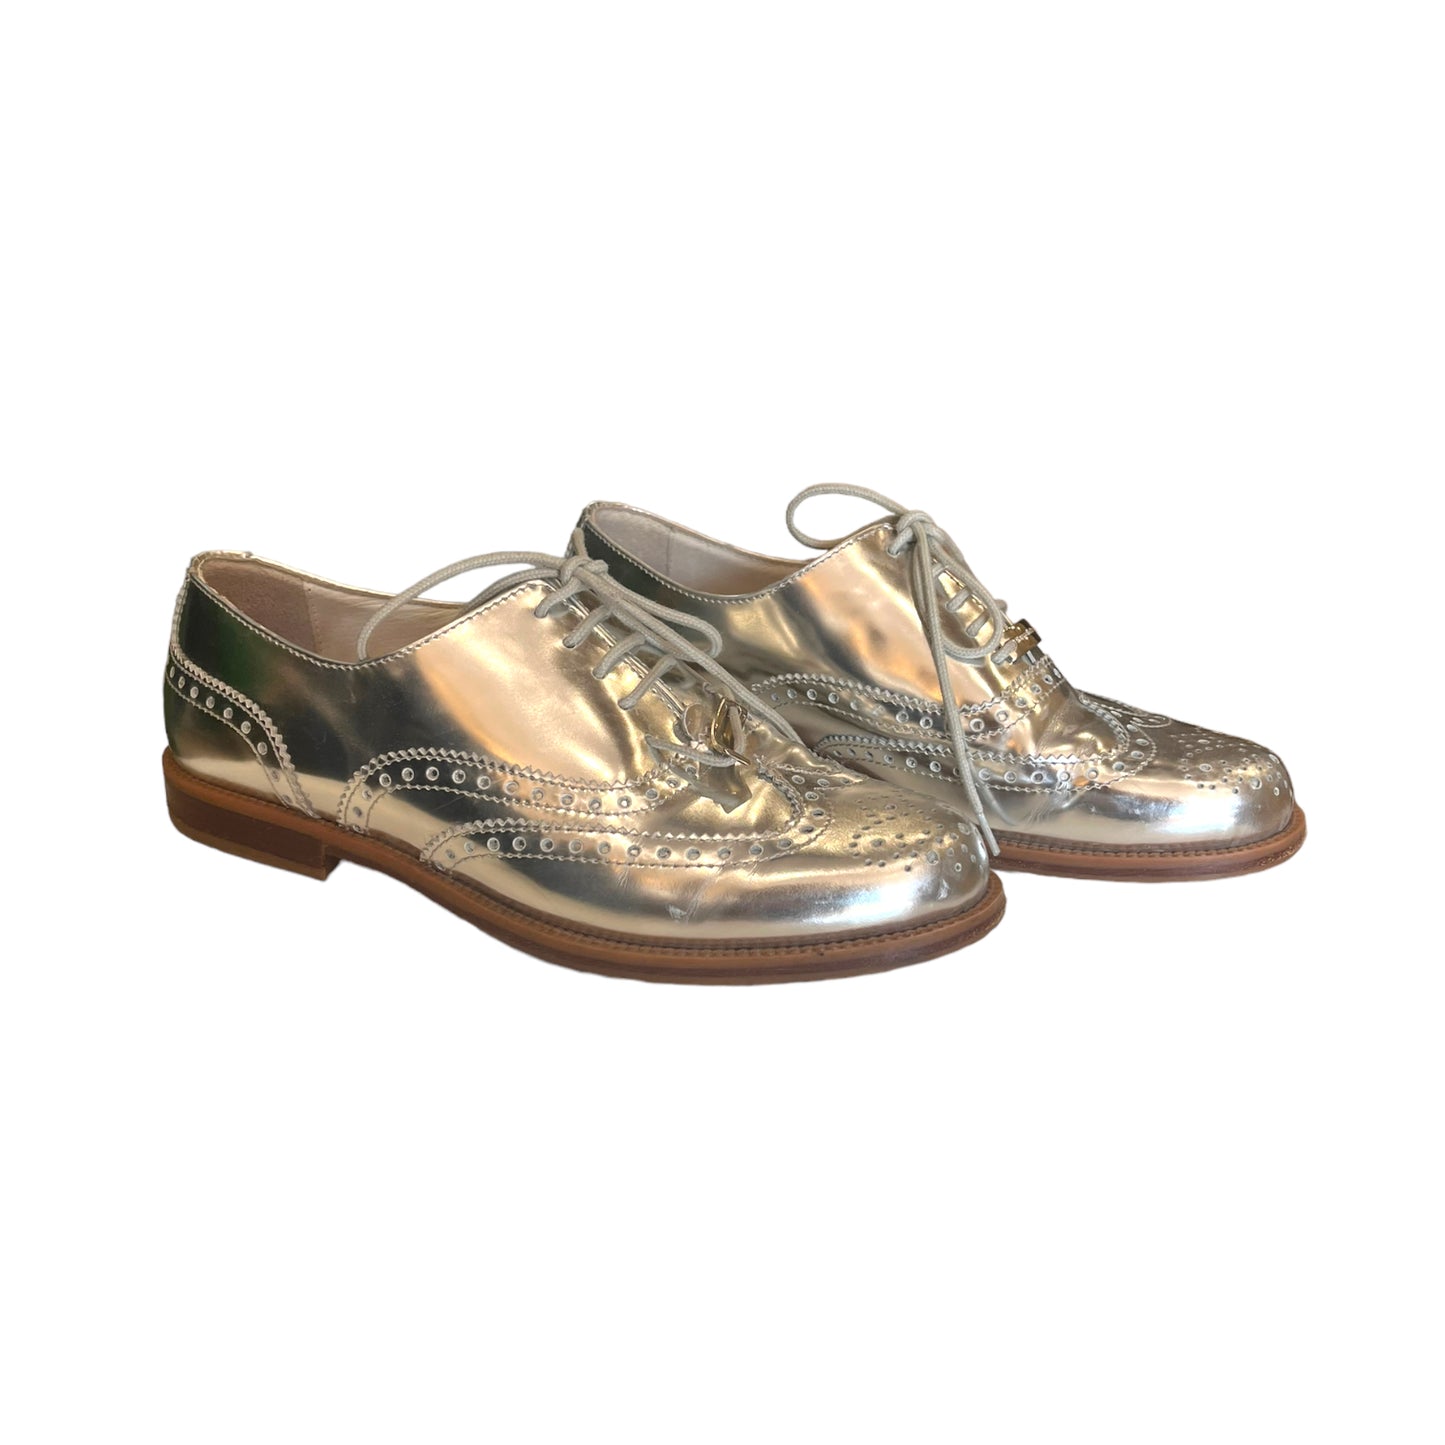 Russell and Bromley Silver Brogues